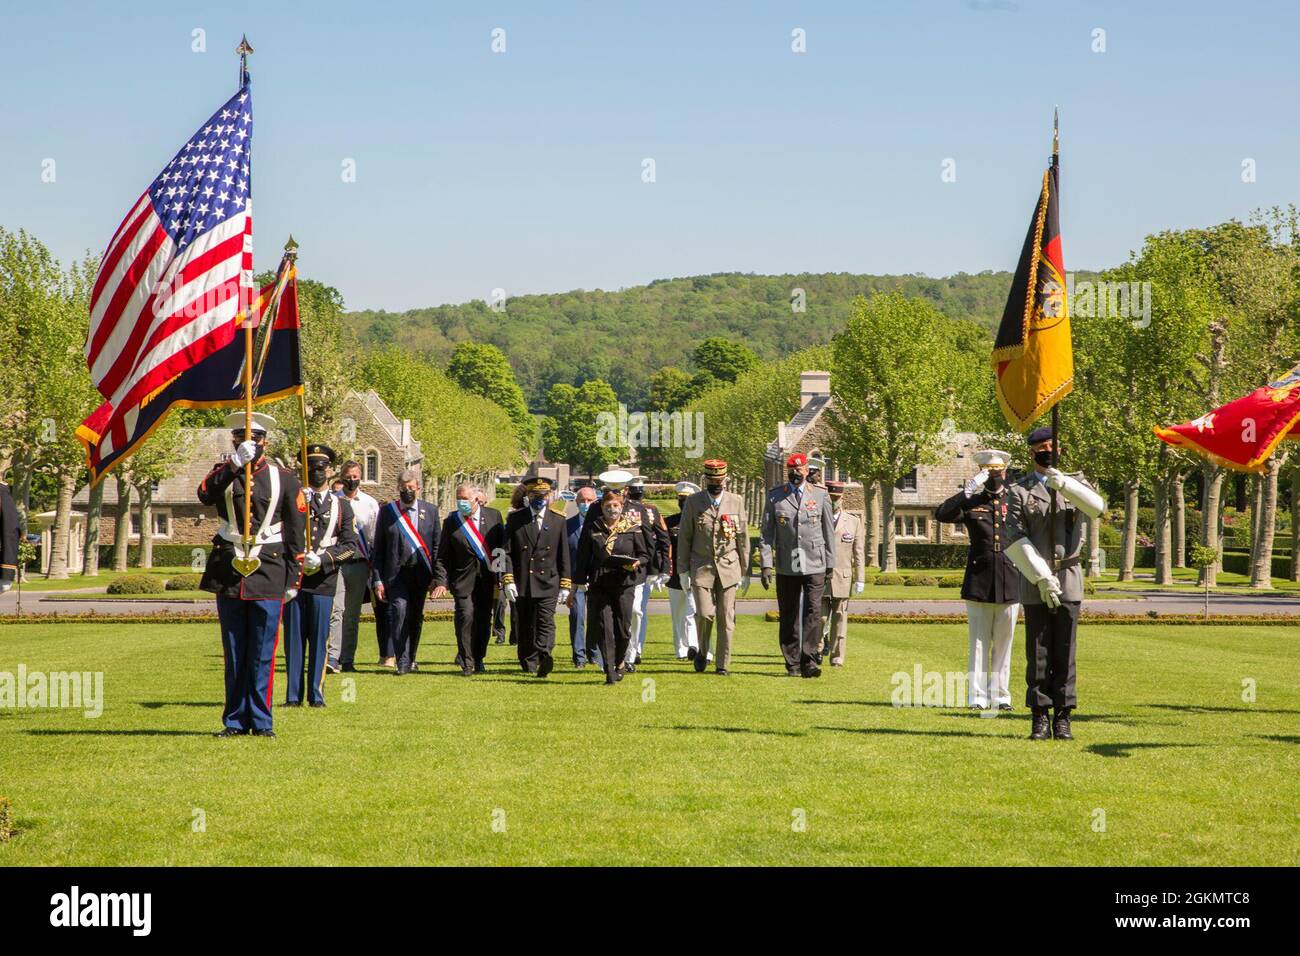 The official party members walk to their seats during a ceremony at Aisne-Marne American Cemetery in Belleau, France, May 30, 2021. The ceremony was held Memorial Day weekend in commemoration of the 103rd anniversary of the battle of Belleau Wood, conducted to honor the legacy of service members who gave their lives in defense of the United States and European allies.  U.S. Marines and Sailors from Marine Corps Forces Europe and Africa, 5th Marine Regiment, 6th Marine Regiment, 1st Marine Division band, U.S. Soldiers from the Army 26th Infantry Division, 2nd Infantry Division representatives, Stock Photo